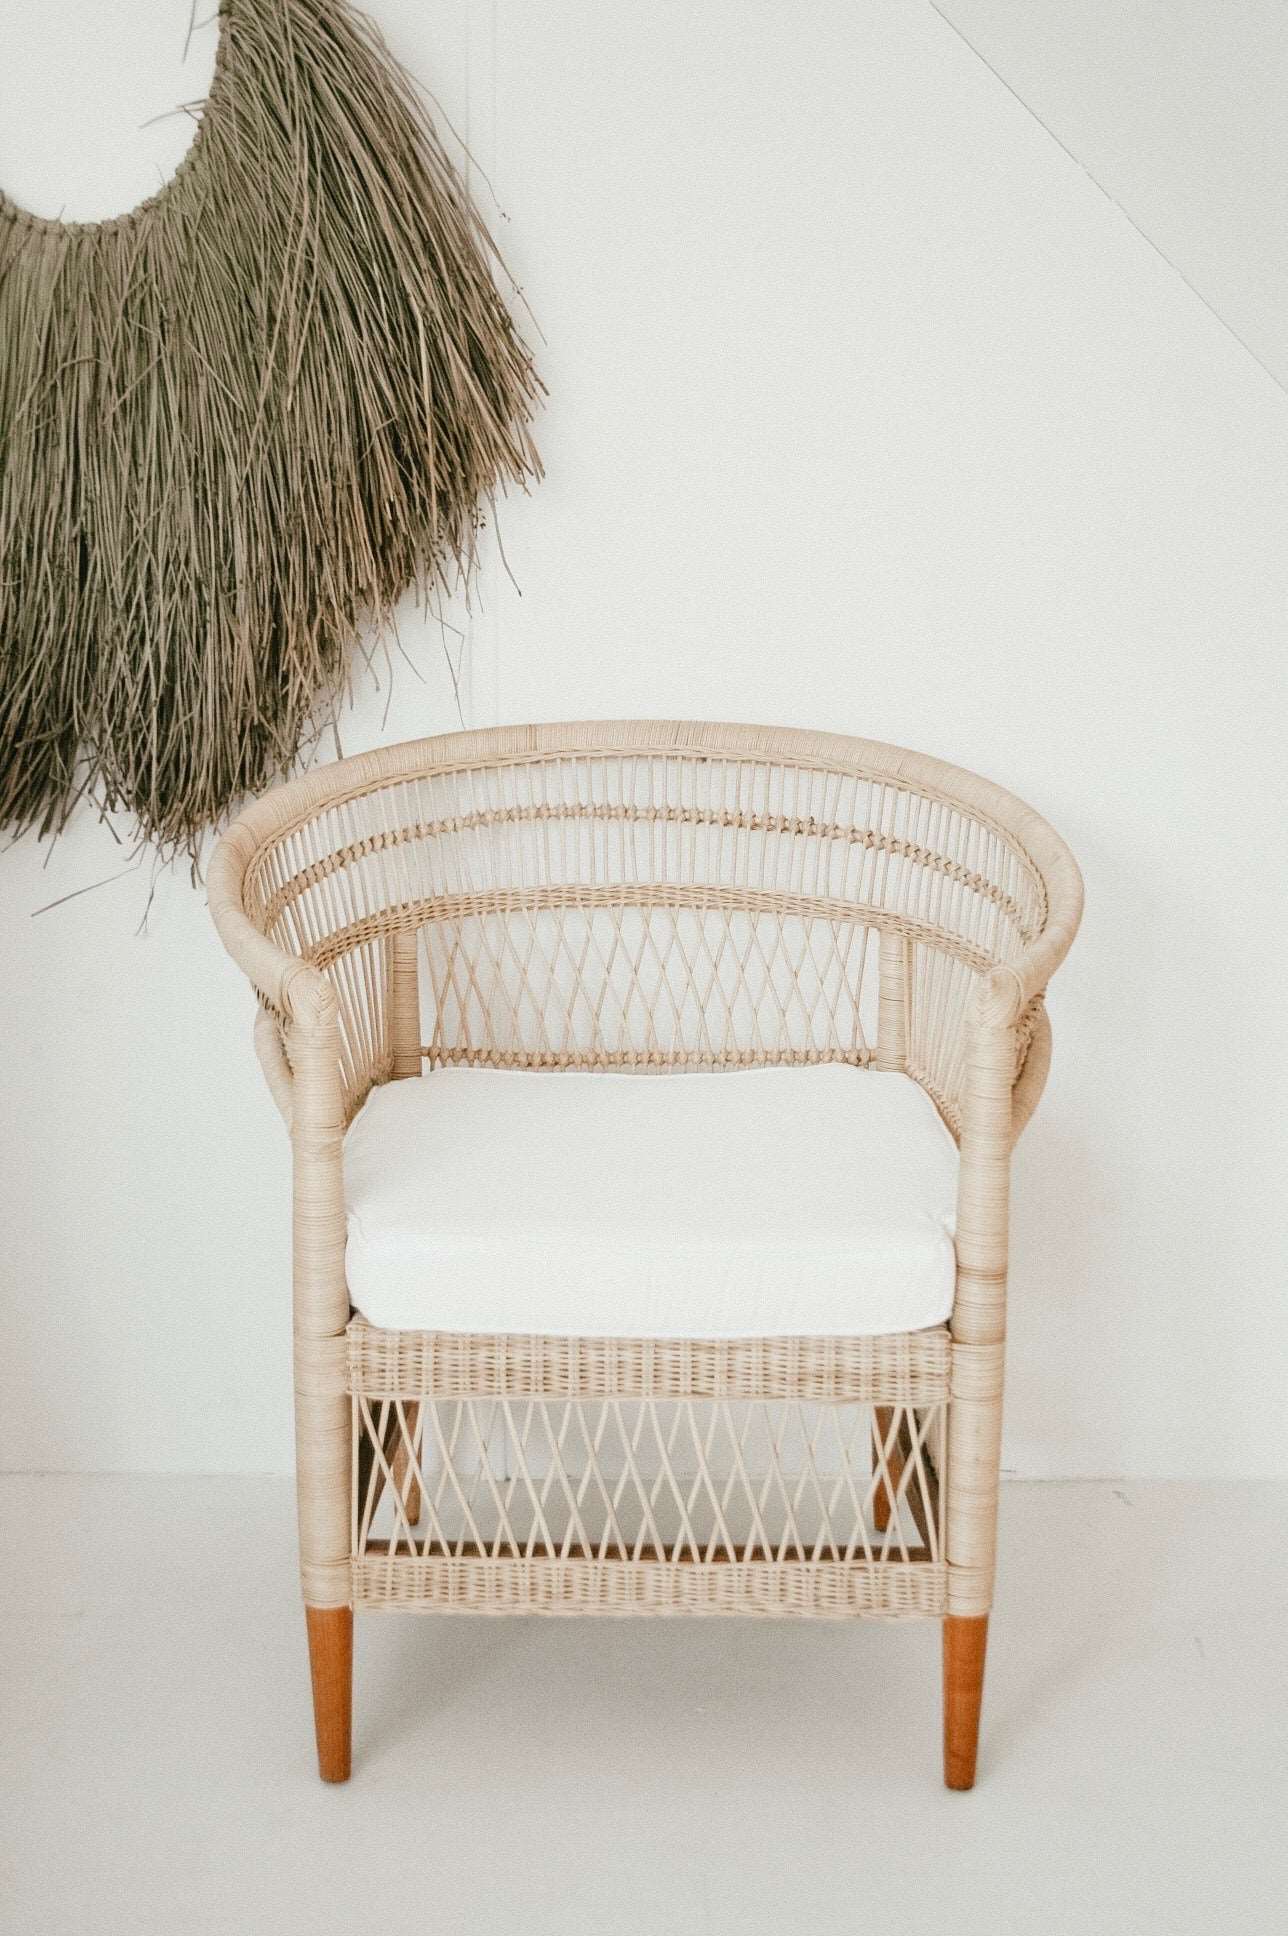 THE BUNGALOW CHAIR